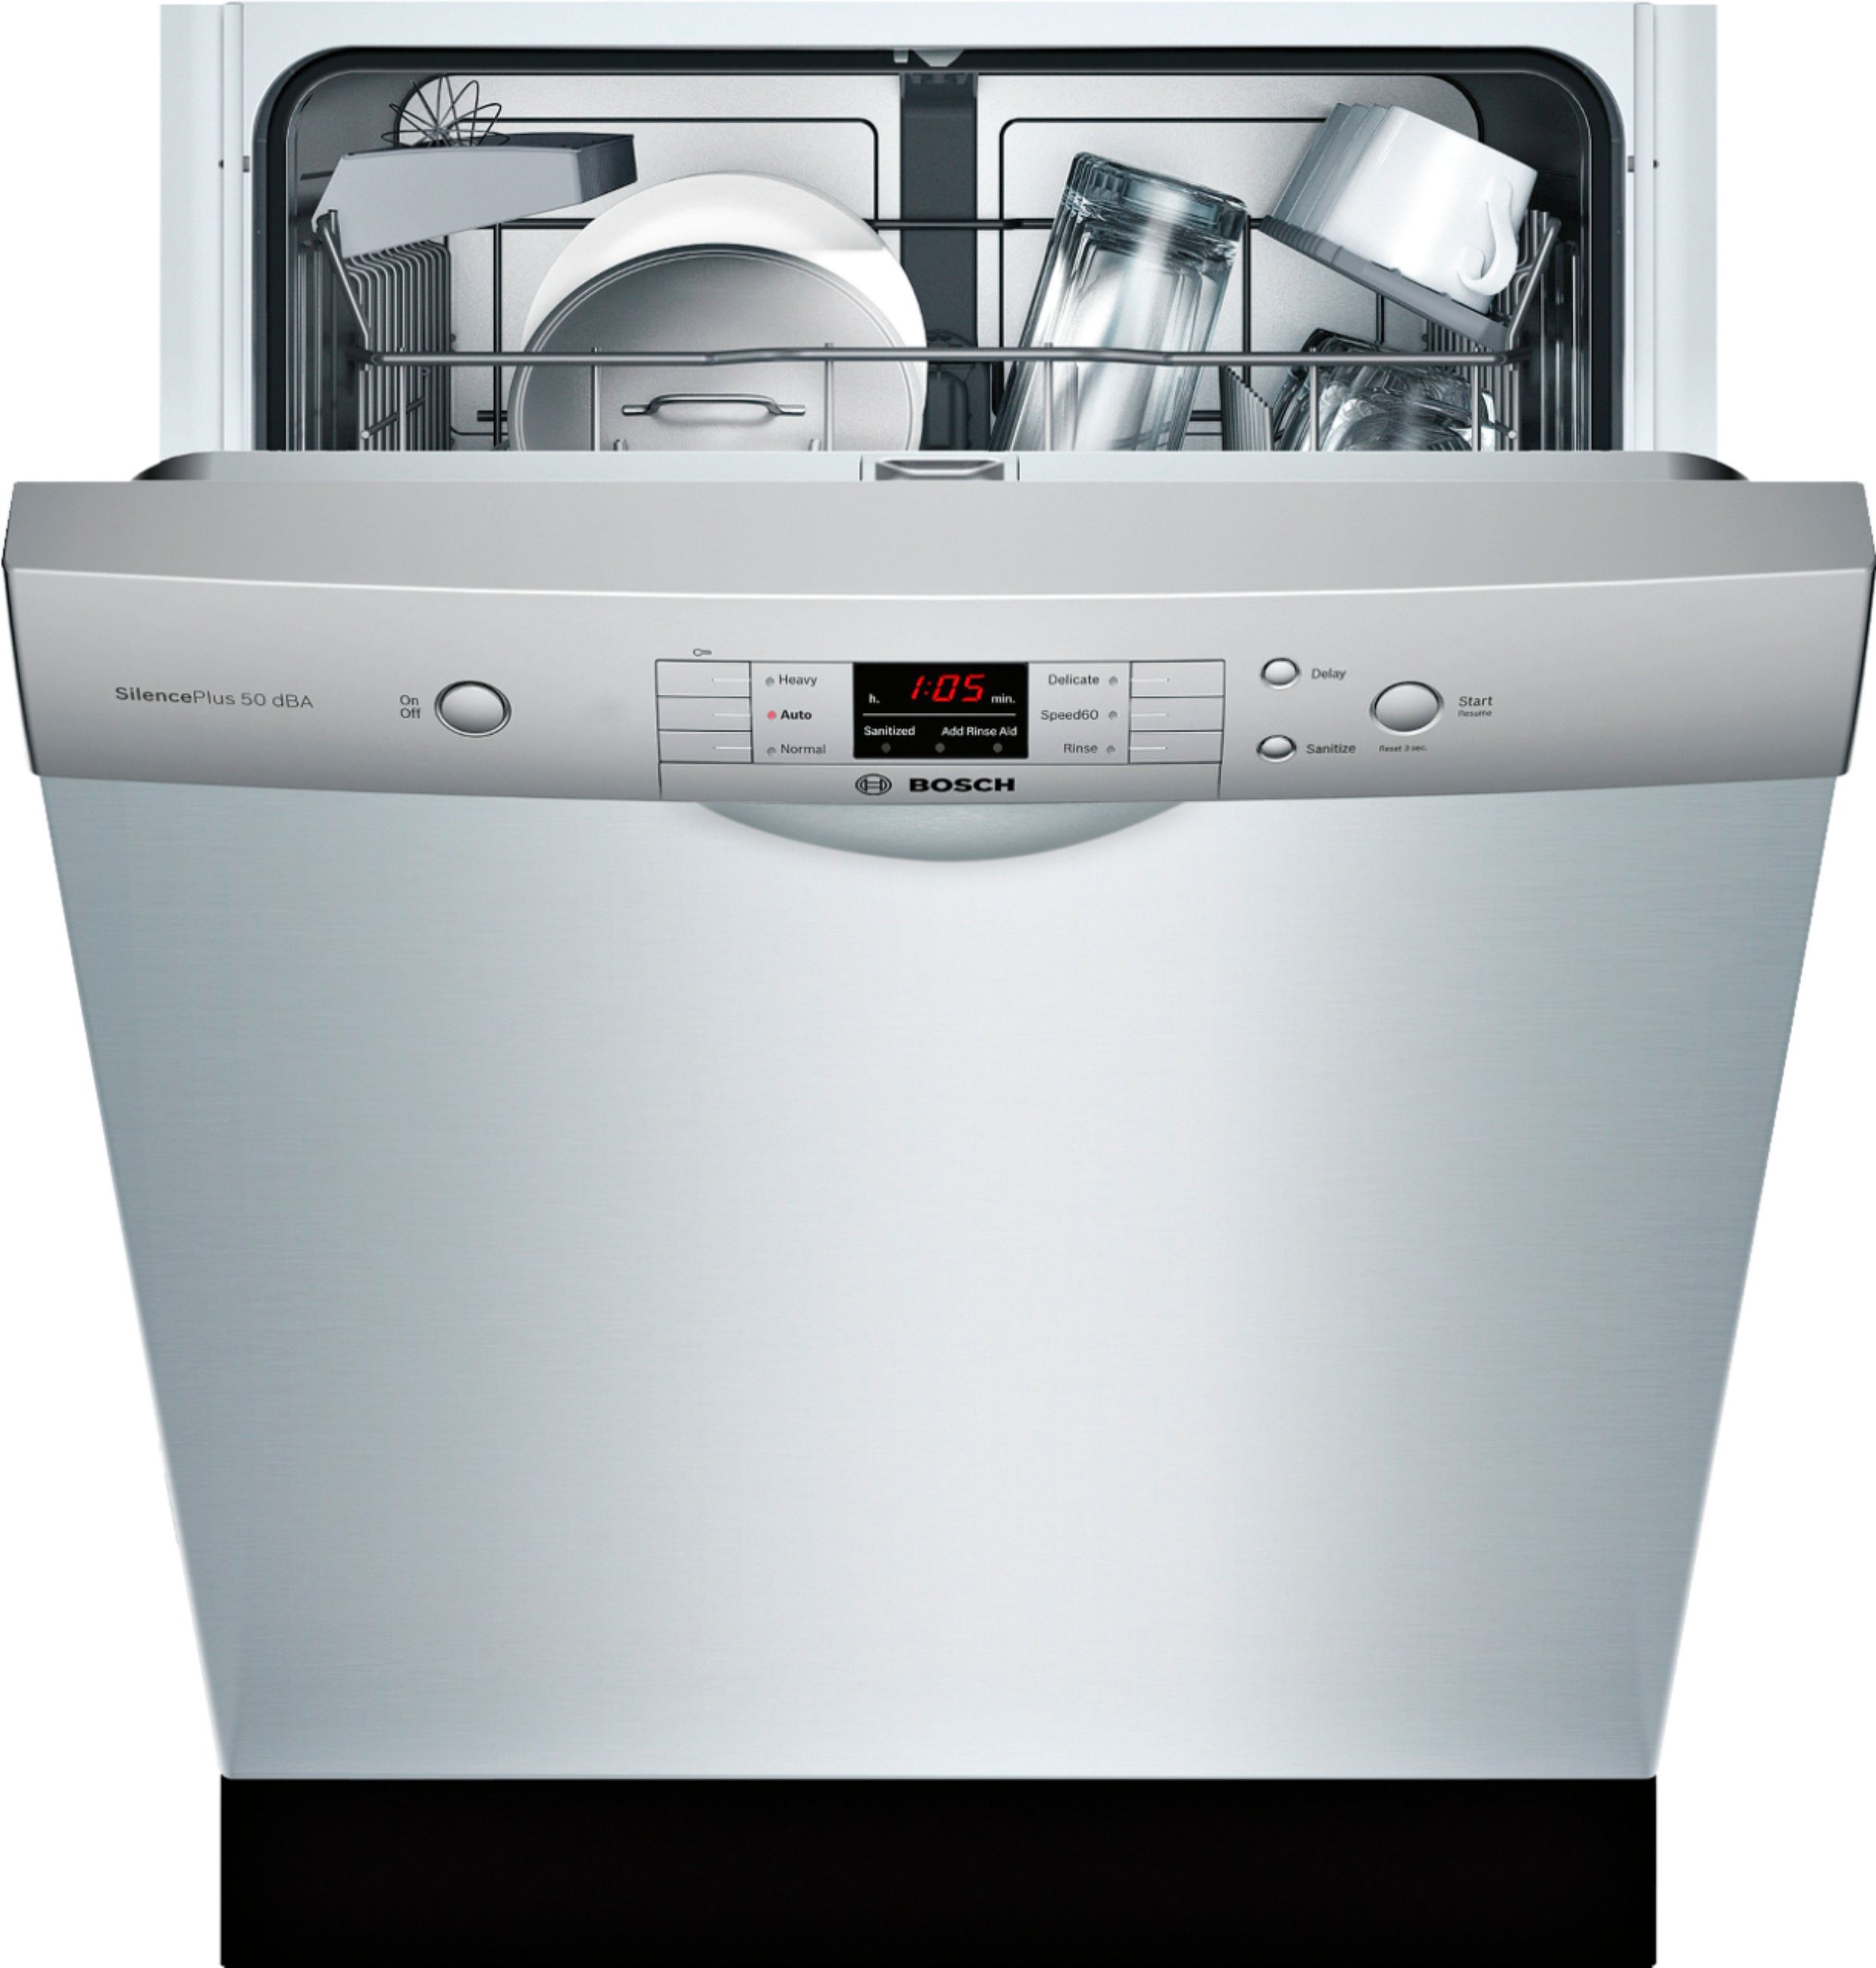 Bosch 100 Series 24 Front Control Built In Dishwasher With